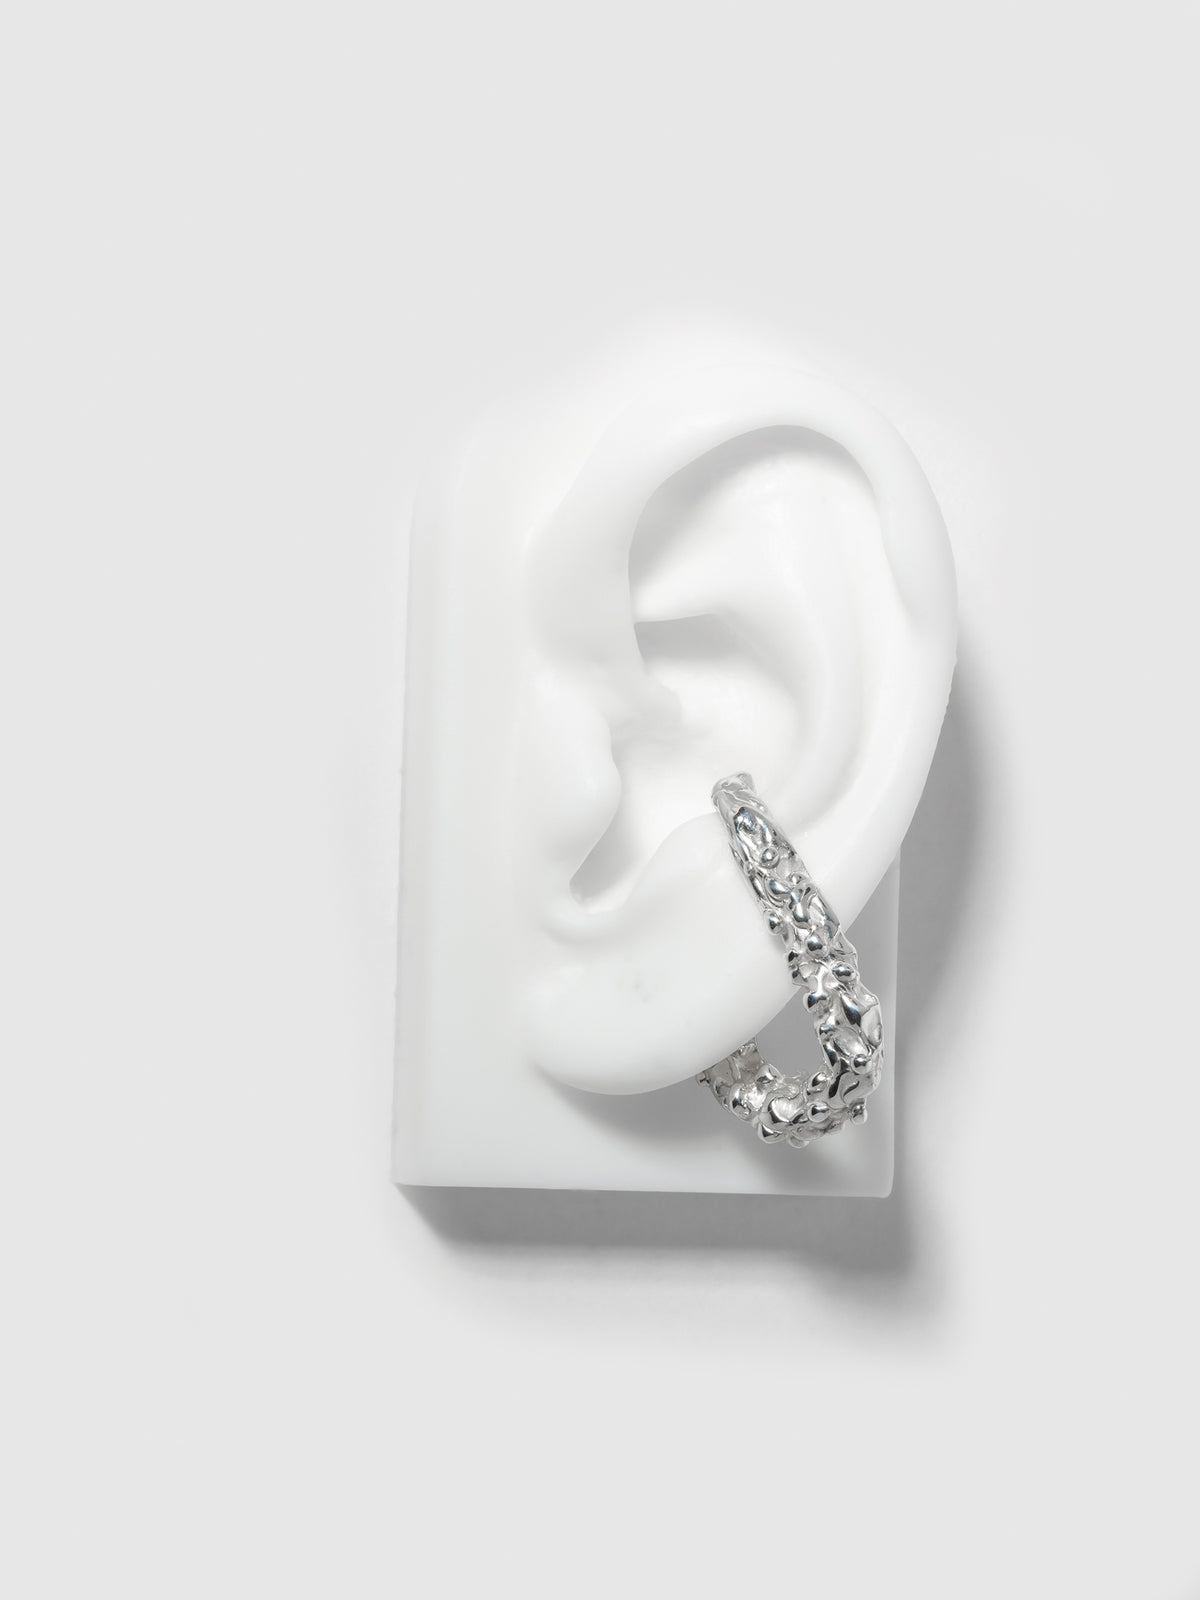 Product image of FARIS ROCA Hang in sterling silver (left ear orientation), shown on silicone ear.